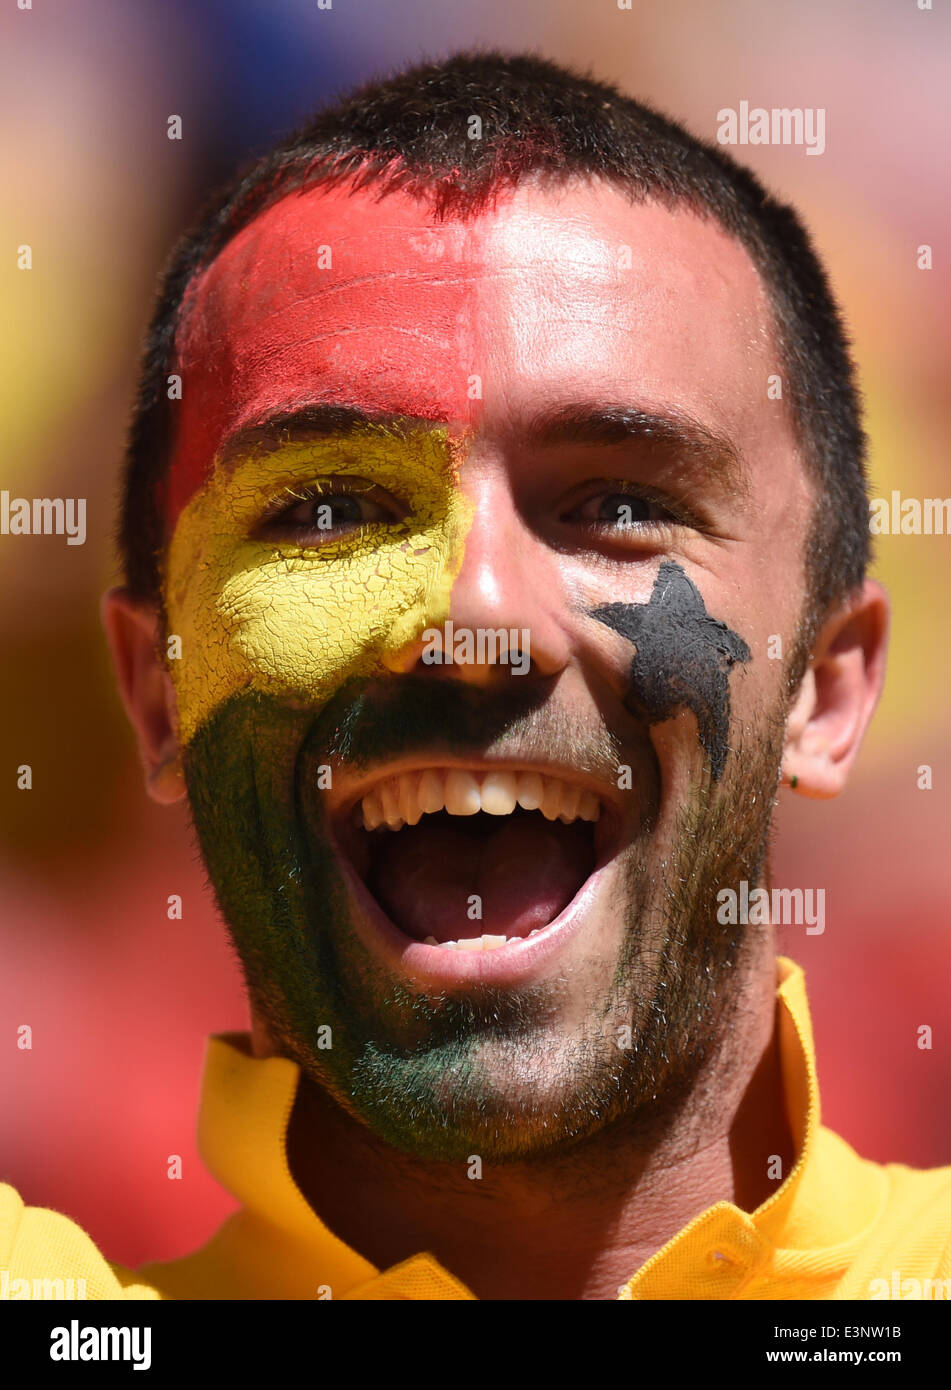 Brasilia, Brazil. 26th June, 2014. A supporter of Ghana cheers prior to the FIFA World Cup 2014 group G preliminary round match between Portugal and Ghana at the Estadio National Stadium in Brasilia, Brazil, on 26 June 2014 Credit: © dpa picture alliance/Alamy Live News  Stock Photo